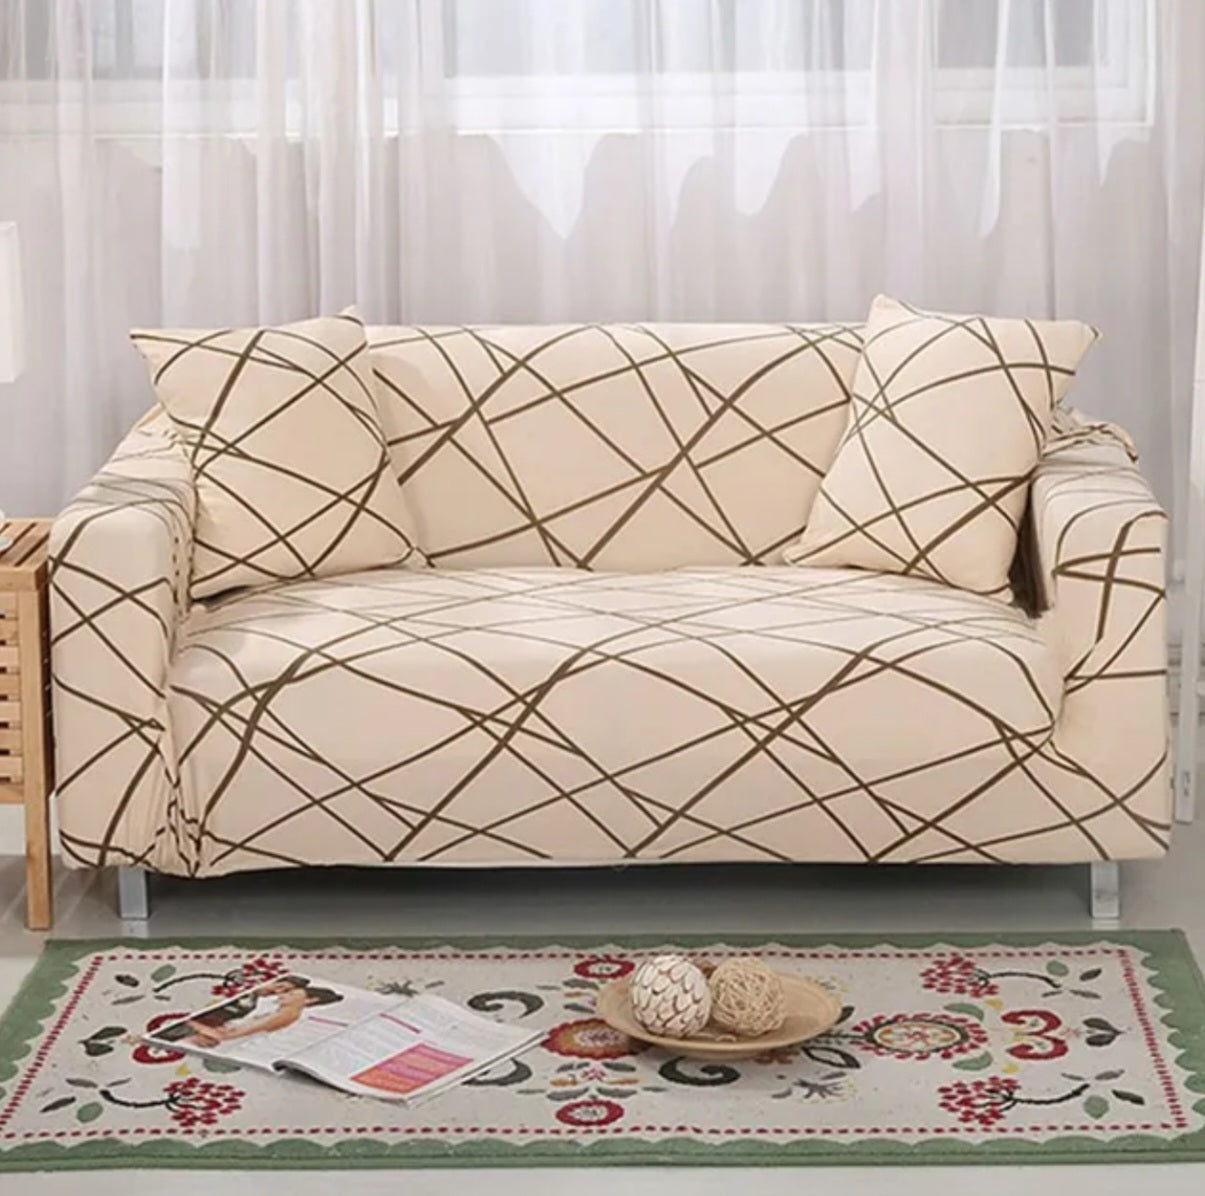 Elastic sofa covers smooth surface, water-repellent various patterns